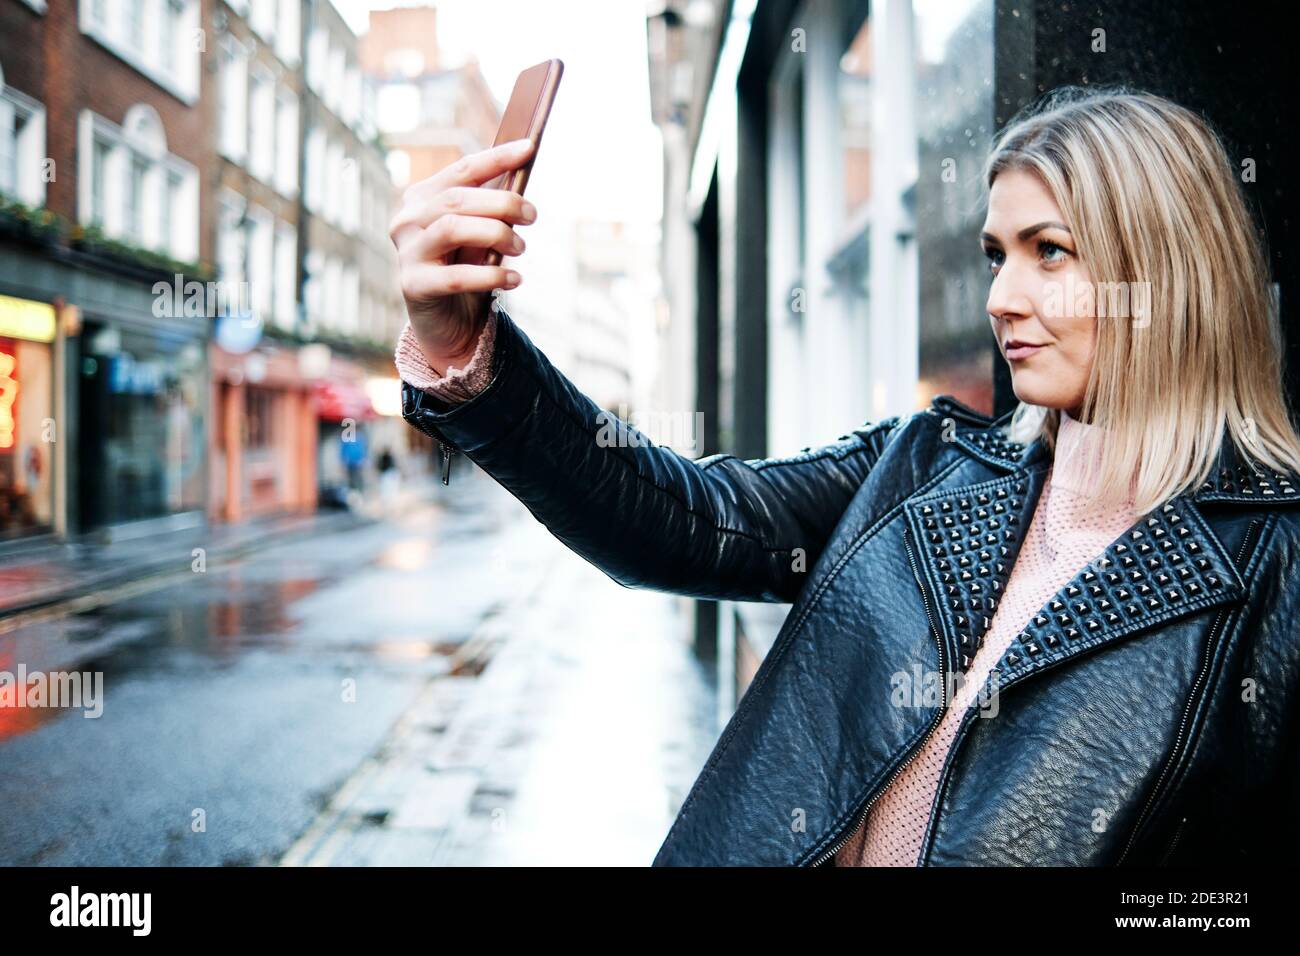 Stylish Girl Biker in Fashionable Clothes. Blond Hair Blogger Woman Making Selfie on Mobile or Smart Phone. Black leather jacket. Street Fashion Lifes Stock Photo